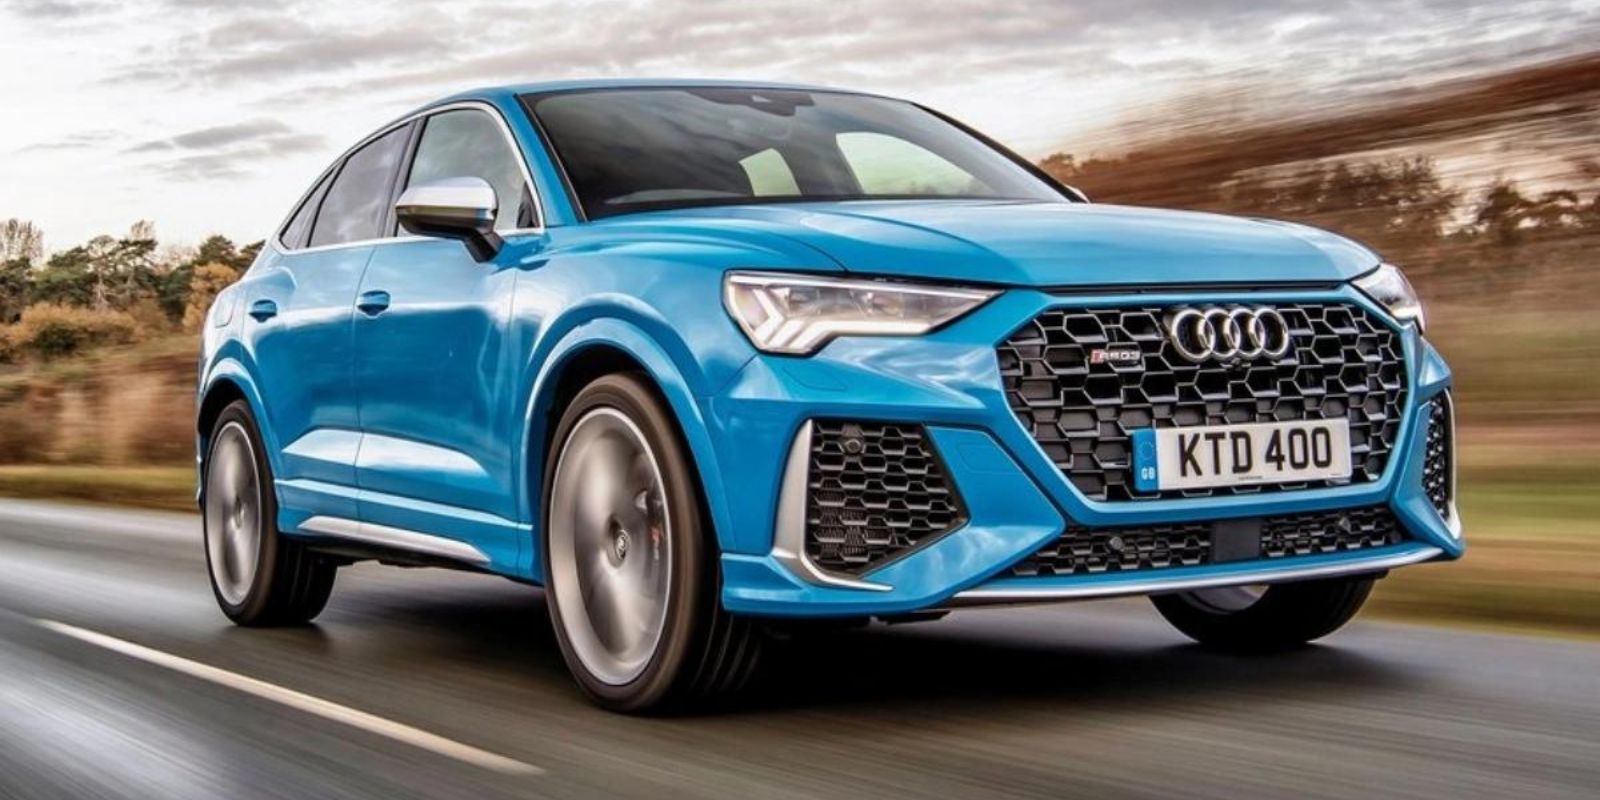 2023 Audi Q3 Sportback Launched In India At Rs. 51.43 Lakh